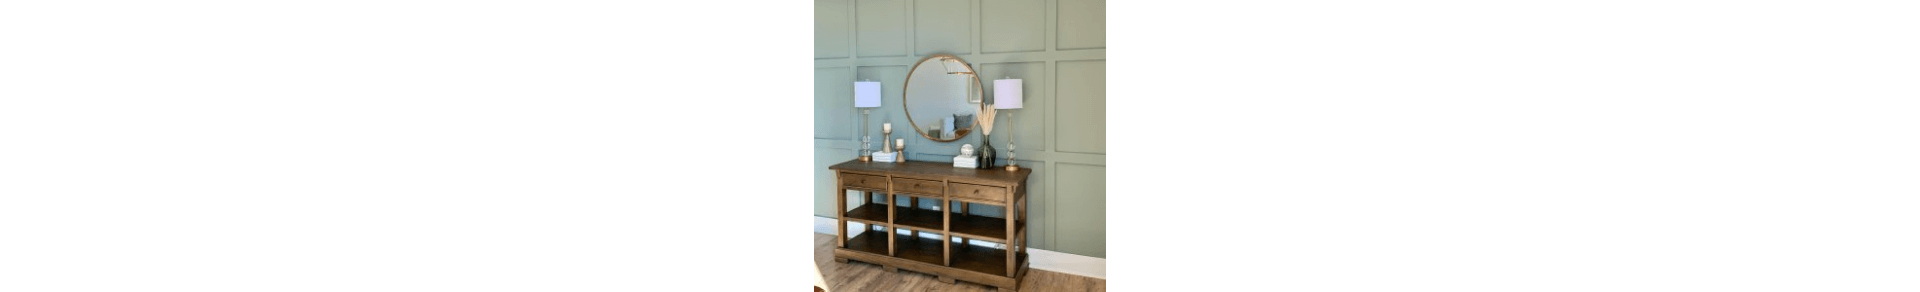 A console table stained a medium brown with lamps and décor on top against a wall painted a green-gray.